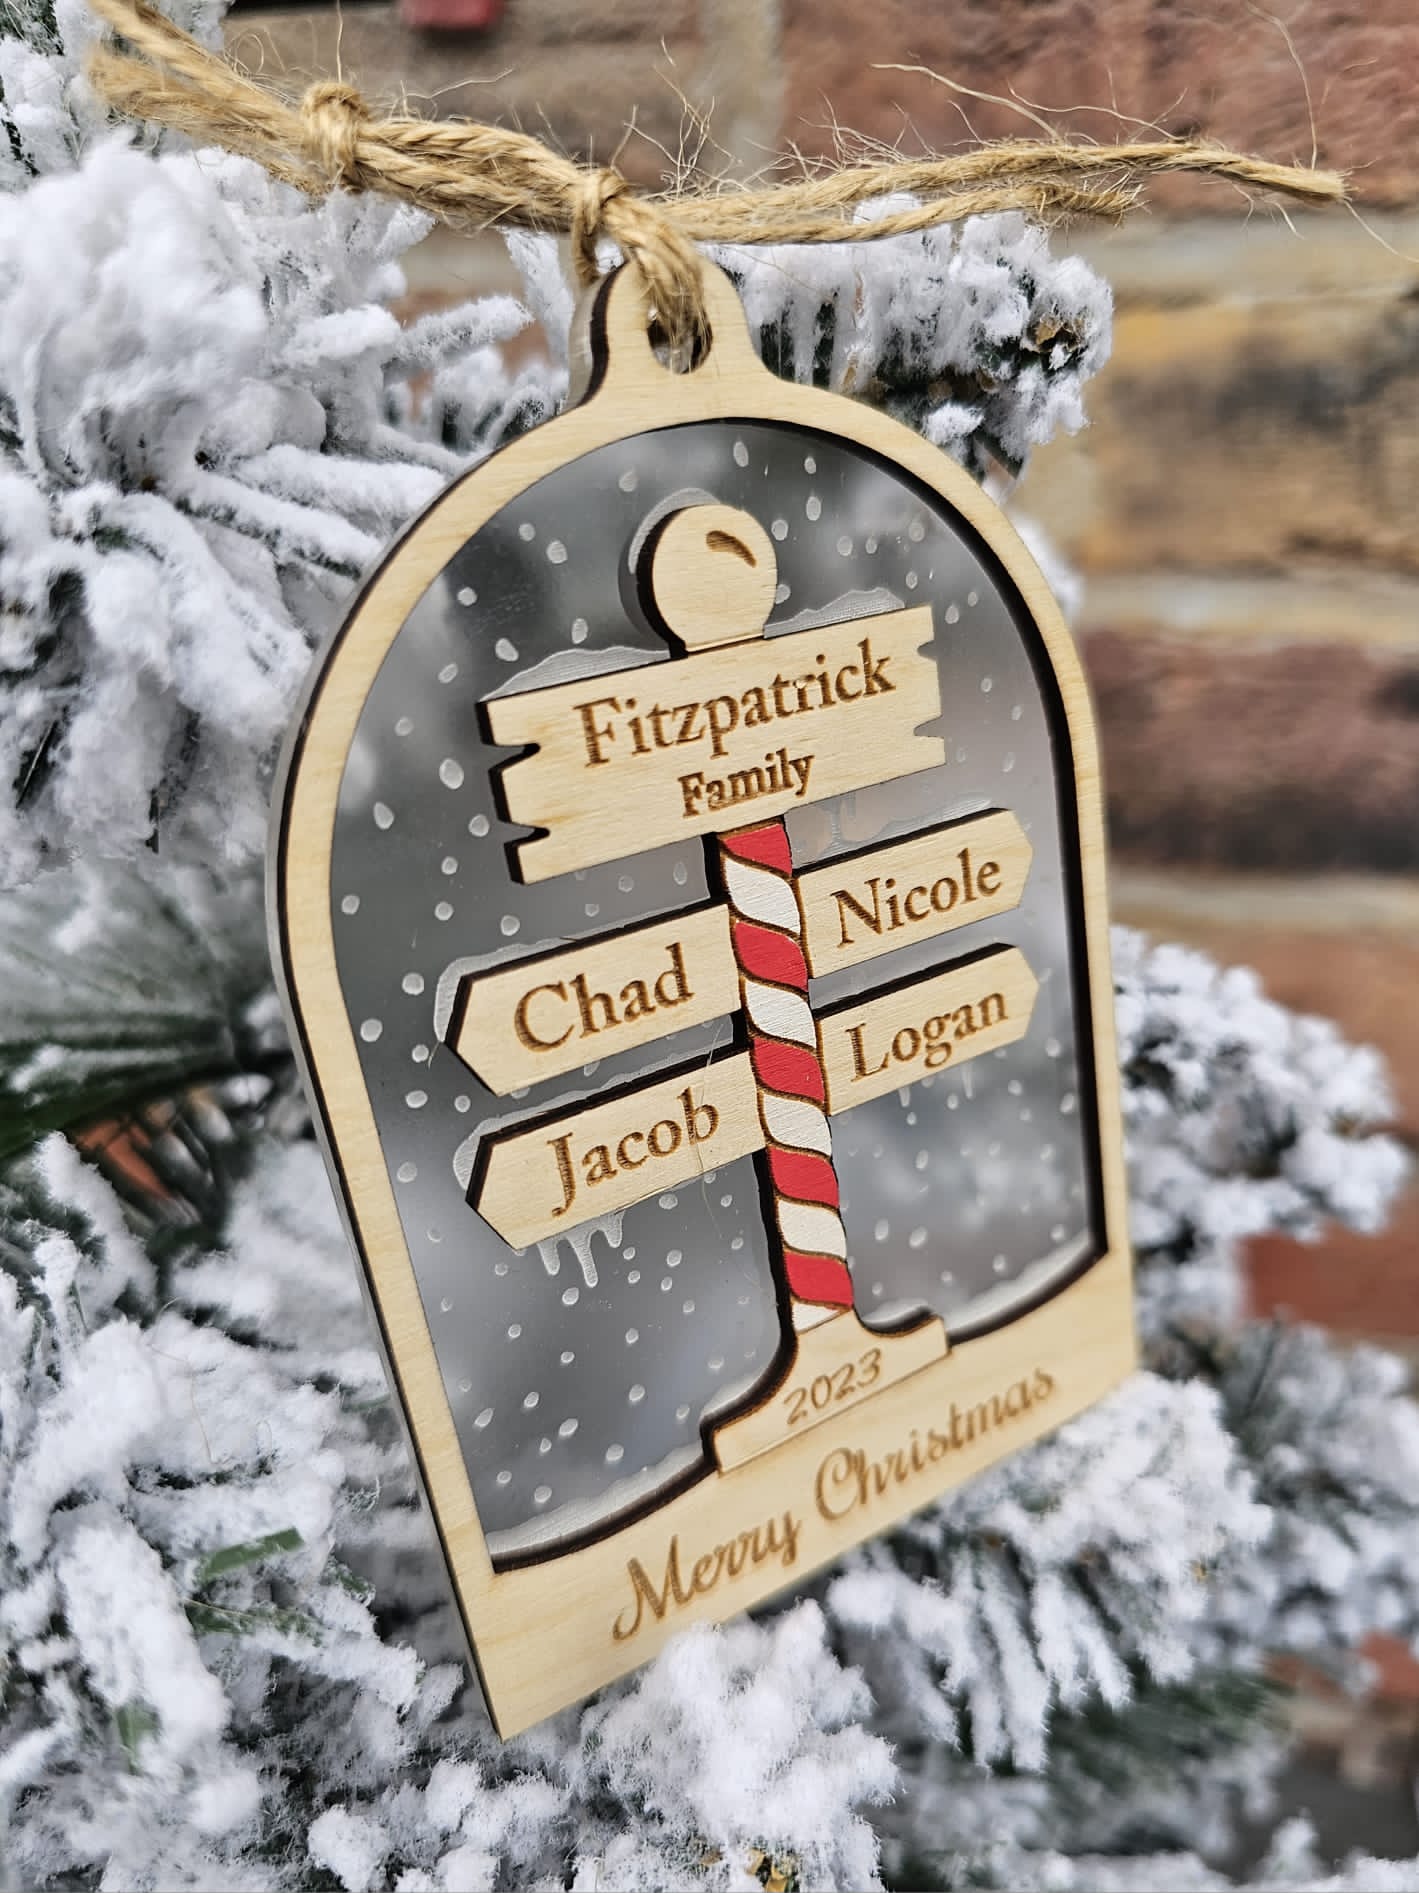 North Pole Family arched ornament